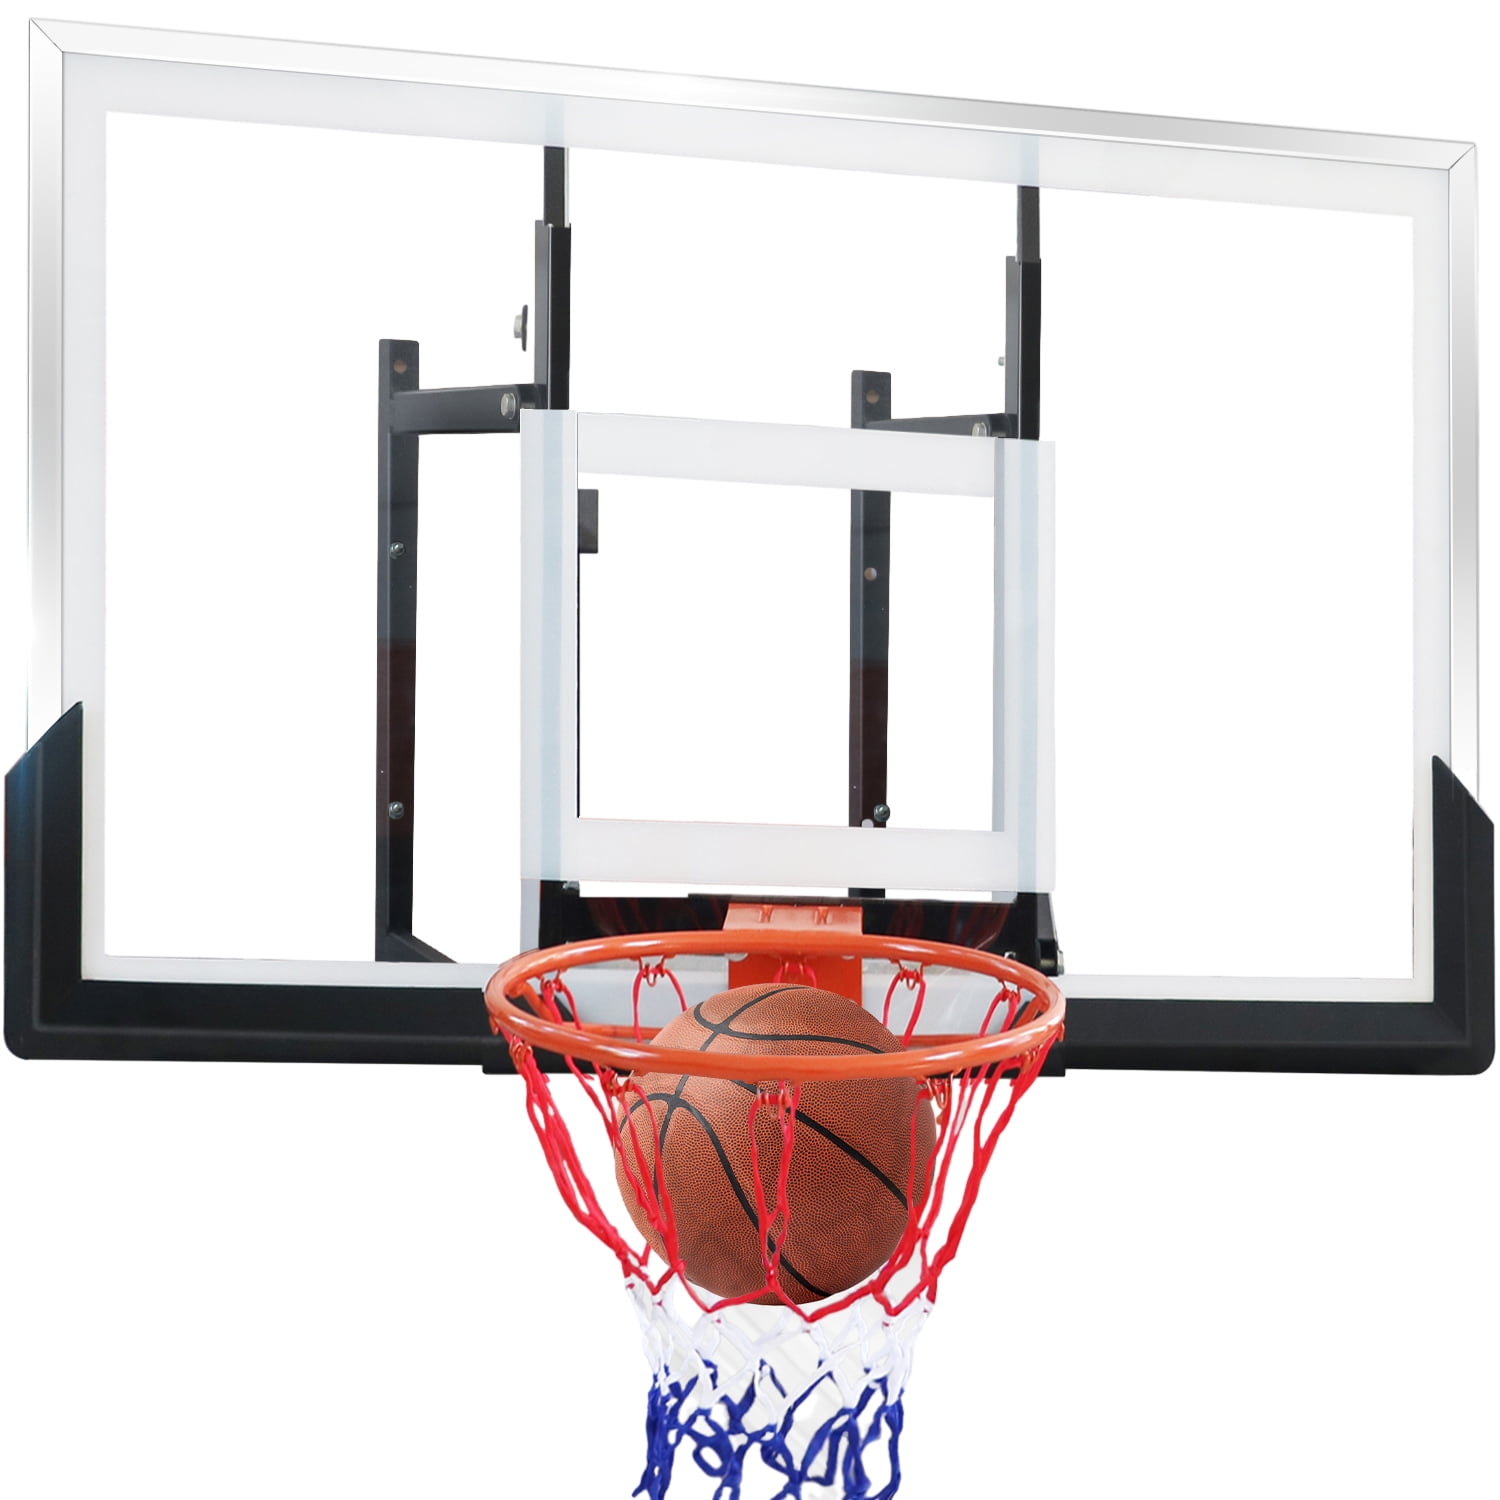 Summer Waves Basketball Set White, Pools, included, Hoop Frame with for Basketball Basketball Adults, for Inflatable Rim, Unisex Backboard and